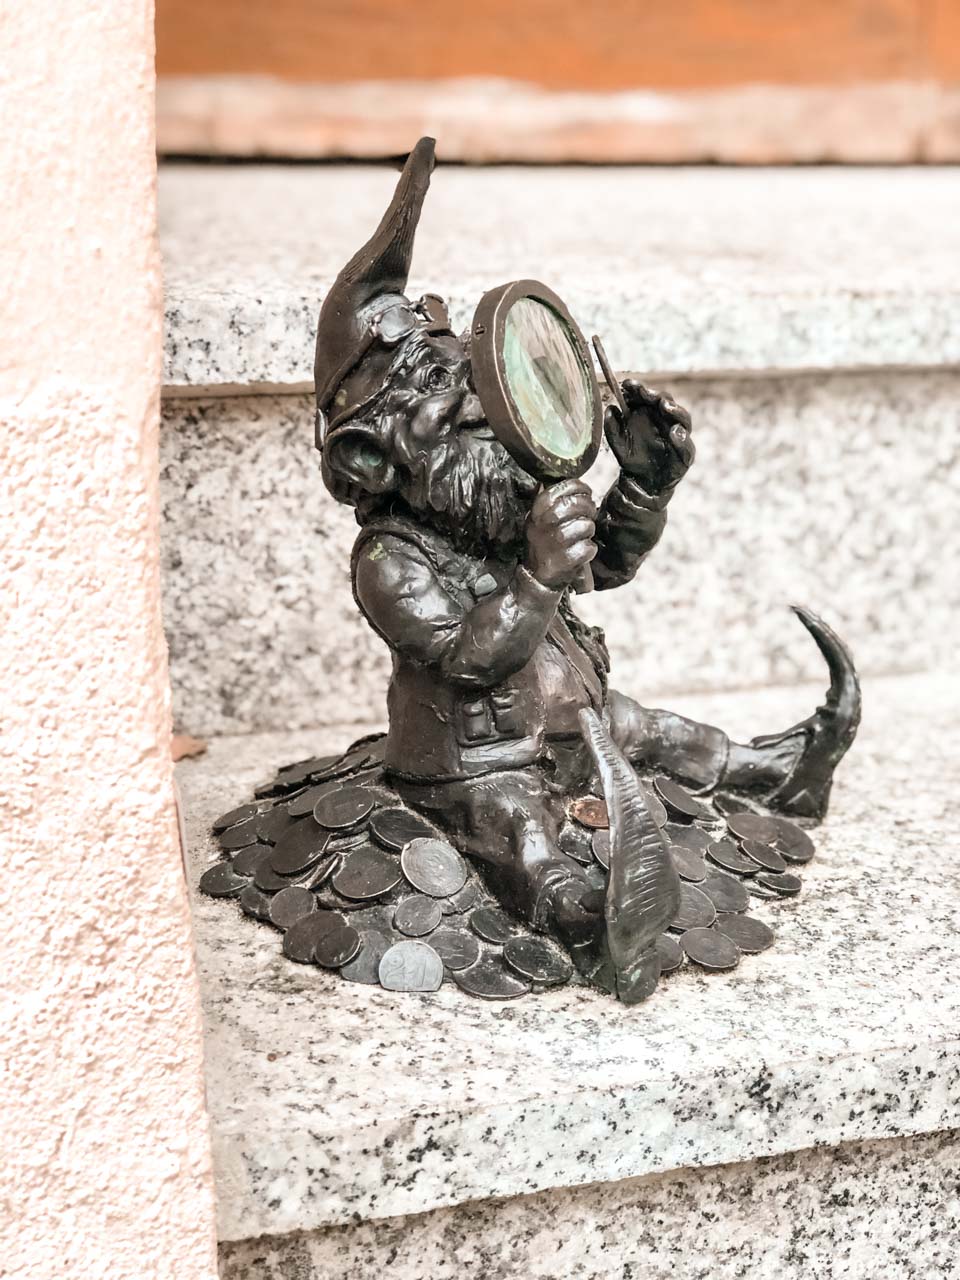 A figurine of a dwarf inspecting coins under a magnifying glass